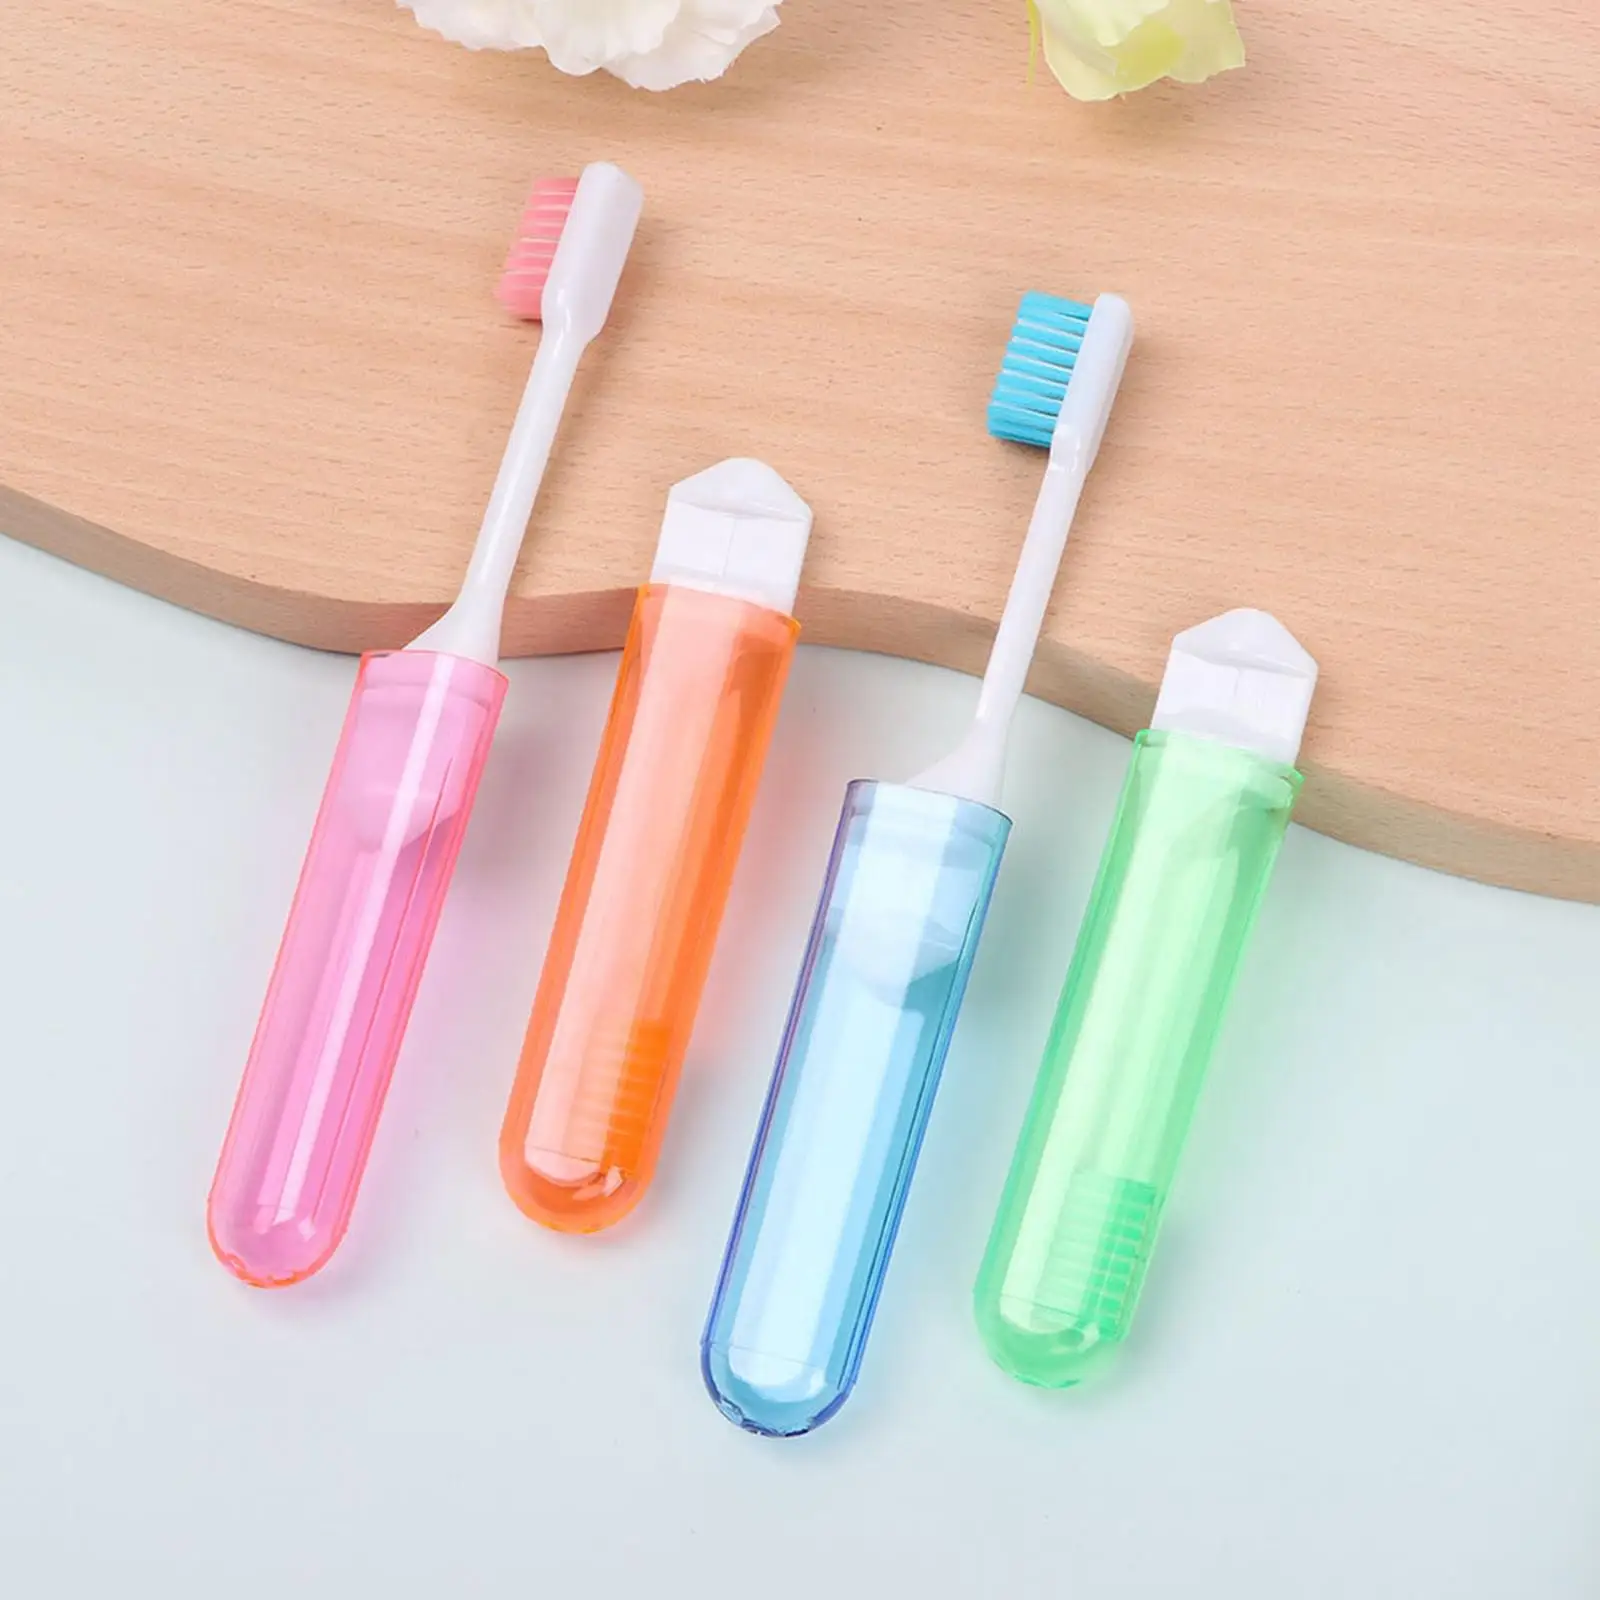 Portable Folding Toothbrush Lightweight Soft Bristle Manual Toothbrush Travel Size Travelling Toothbrush for Camping Hiking Trip